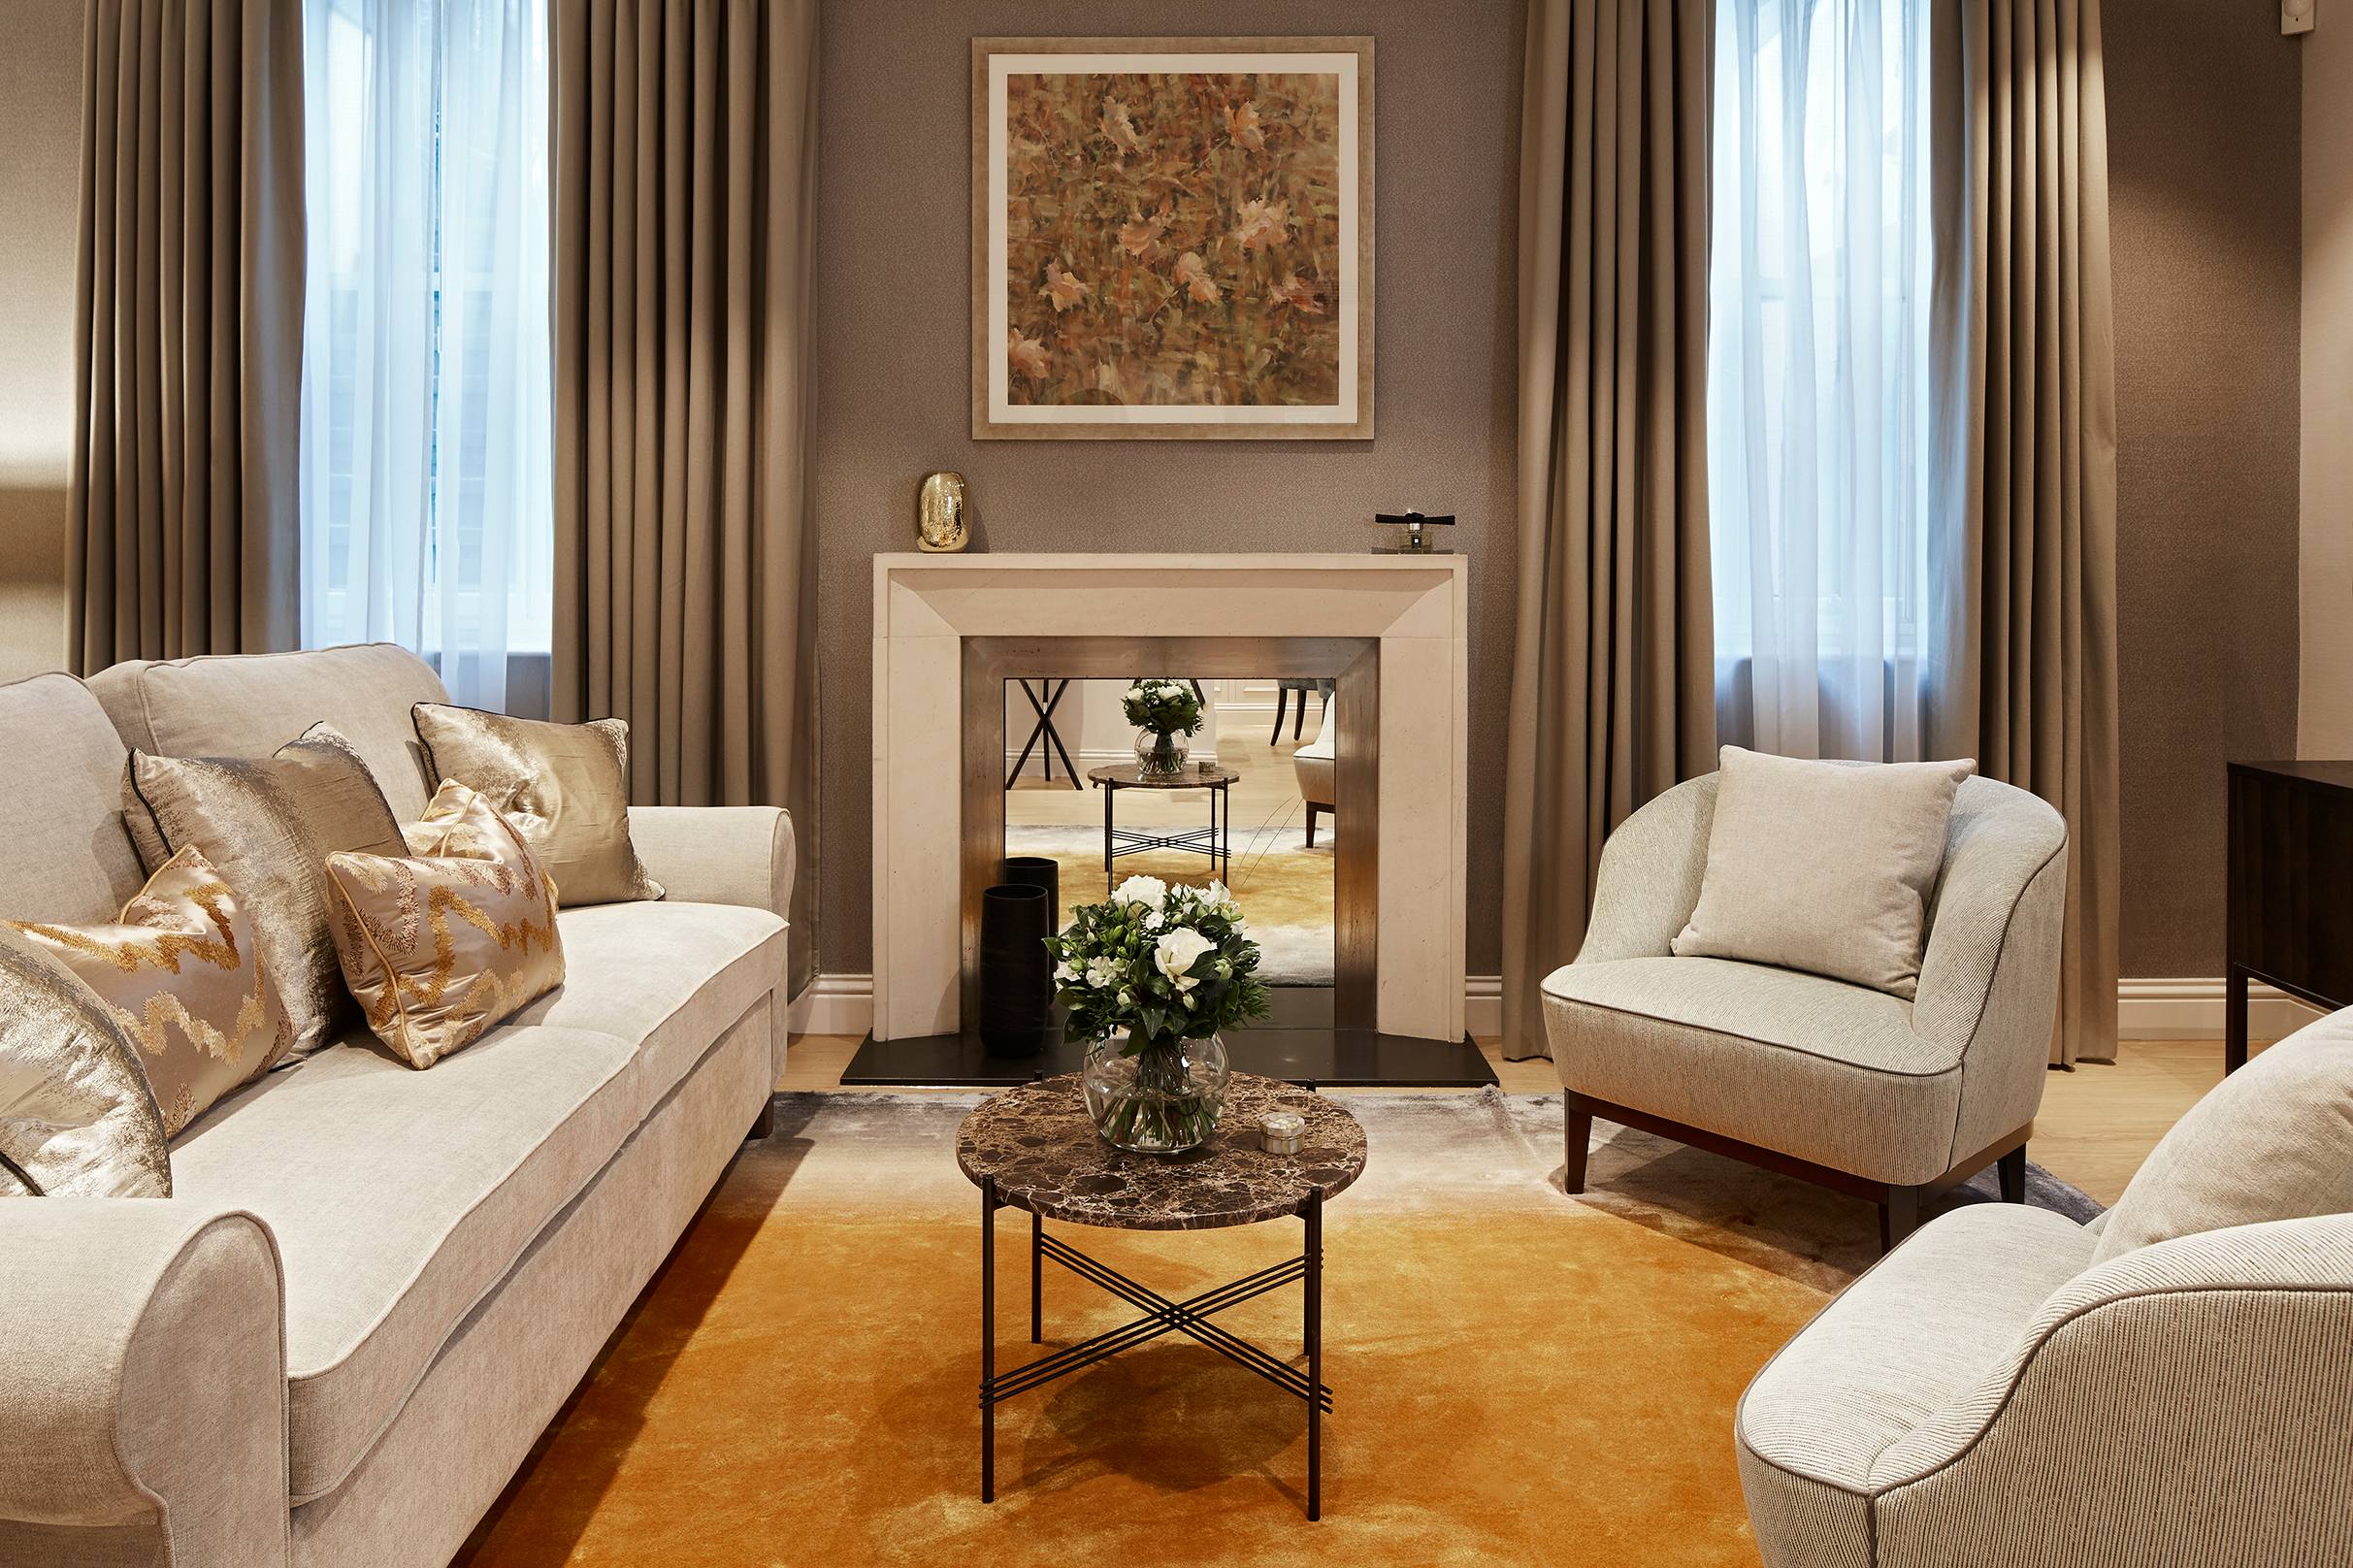 Luxury One-Bedroom Serviced Apartment in a Palatial Kensington Residence